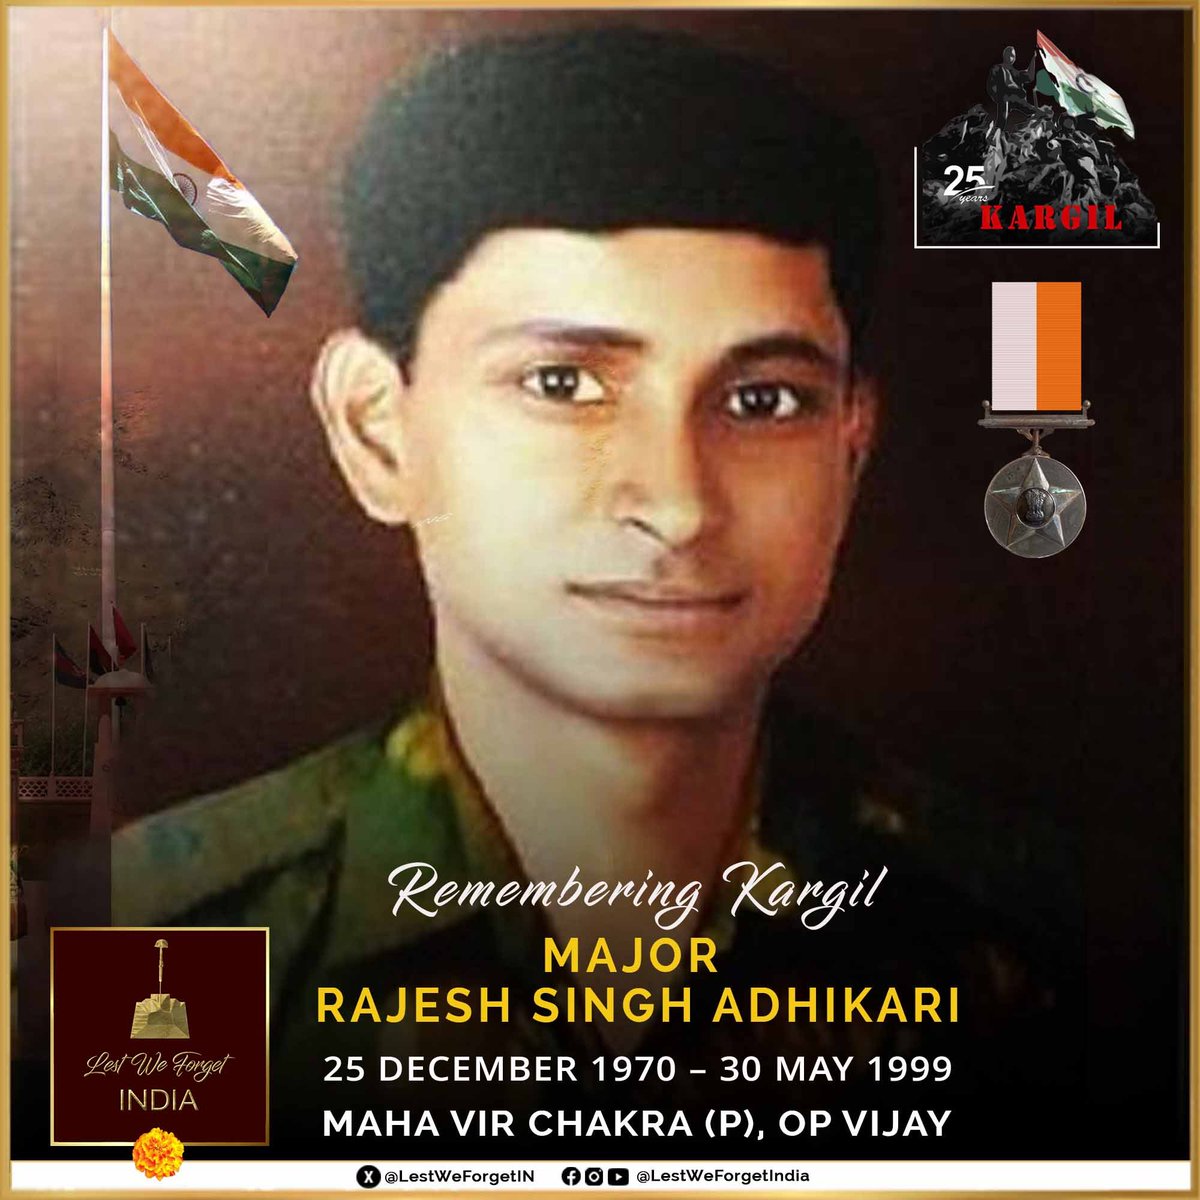 Commemorating 25 years of #Kargil #LestWeForgetIndia🇮🇳 Major Rajesh Singh Adhikari, Maha Vir Chakra (P), 2 MECH INFANTRY/18 GRENADIERS, led the attack to capture a feature at #Tololing. The #IndianBrave laid down his life after killing three enemy soldiers during #OpVijay